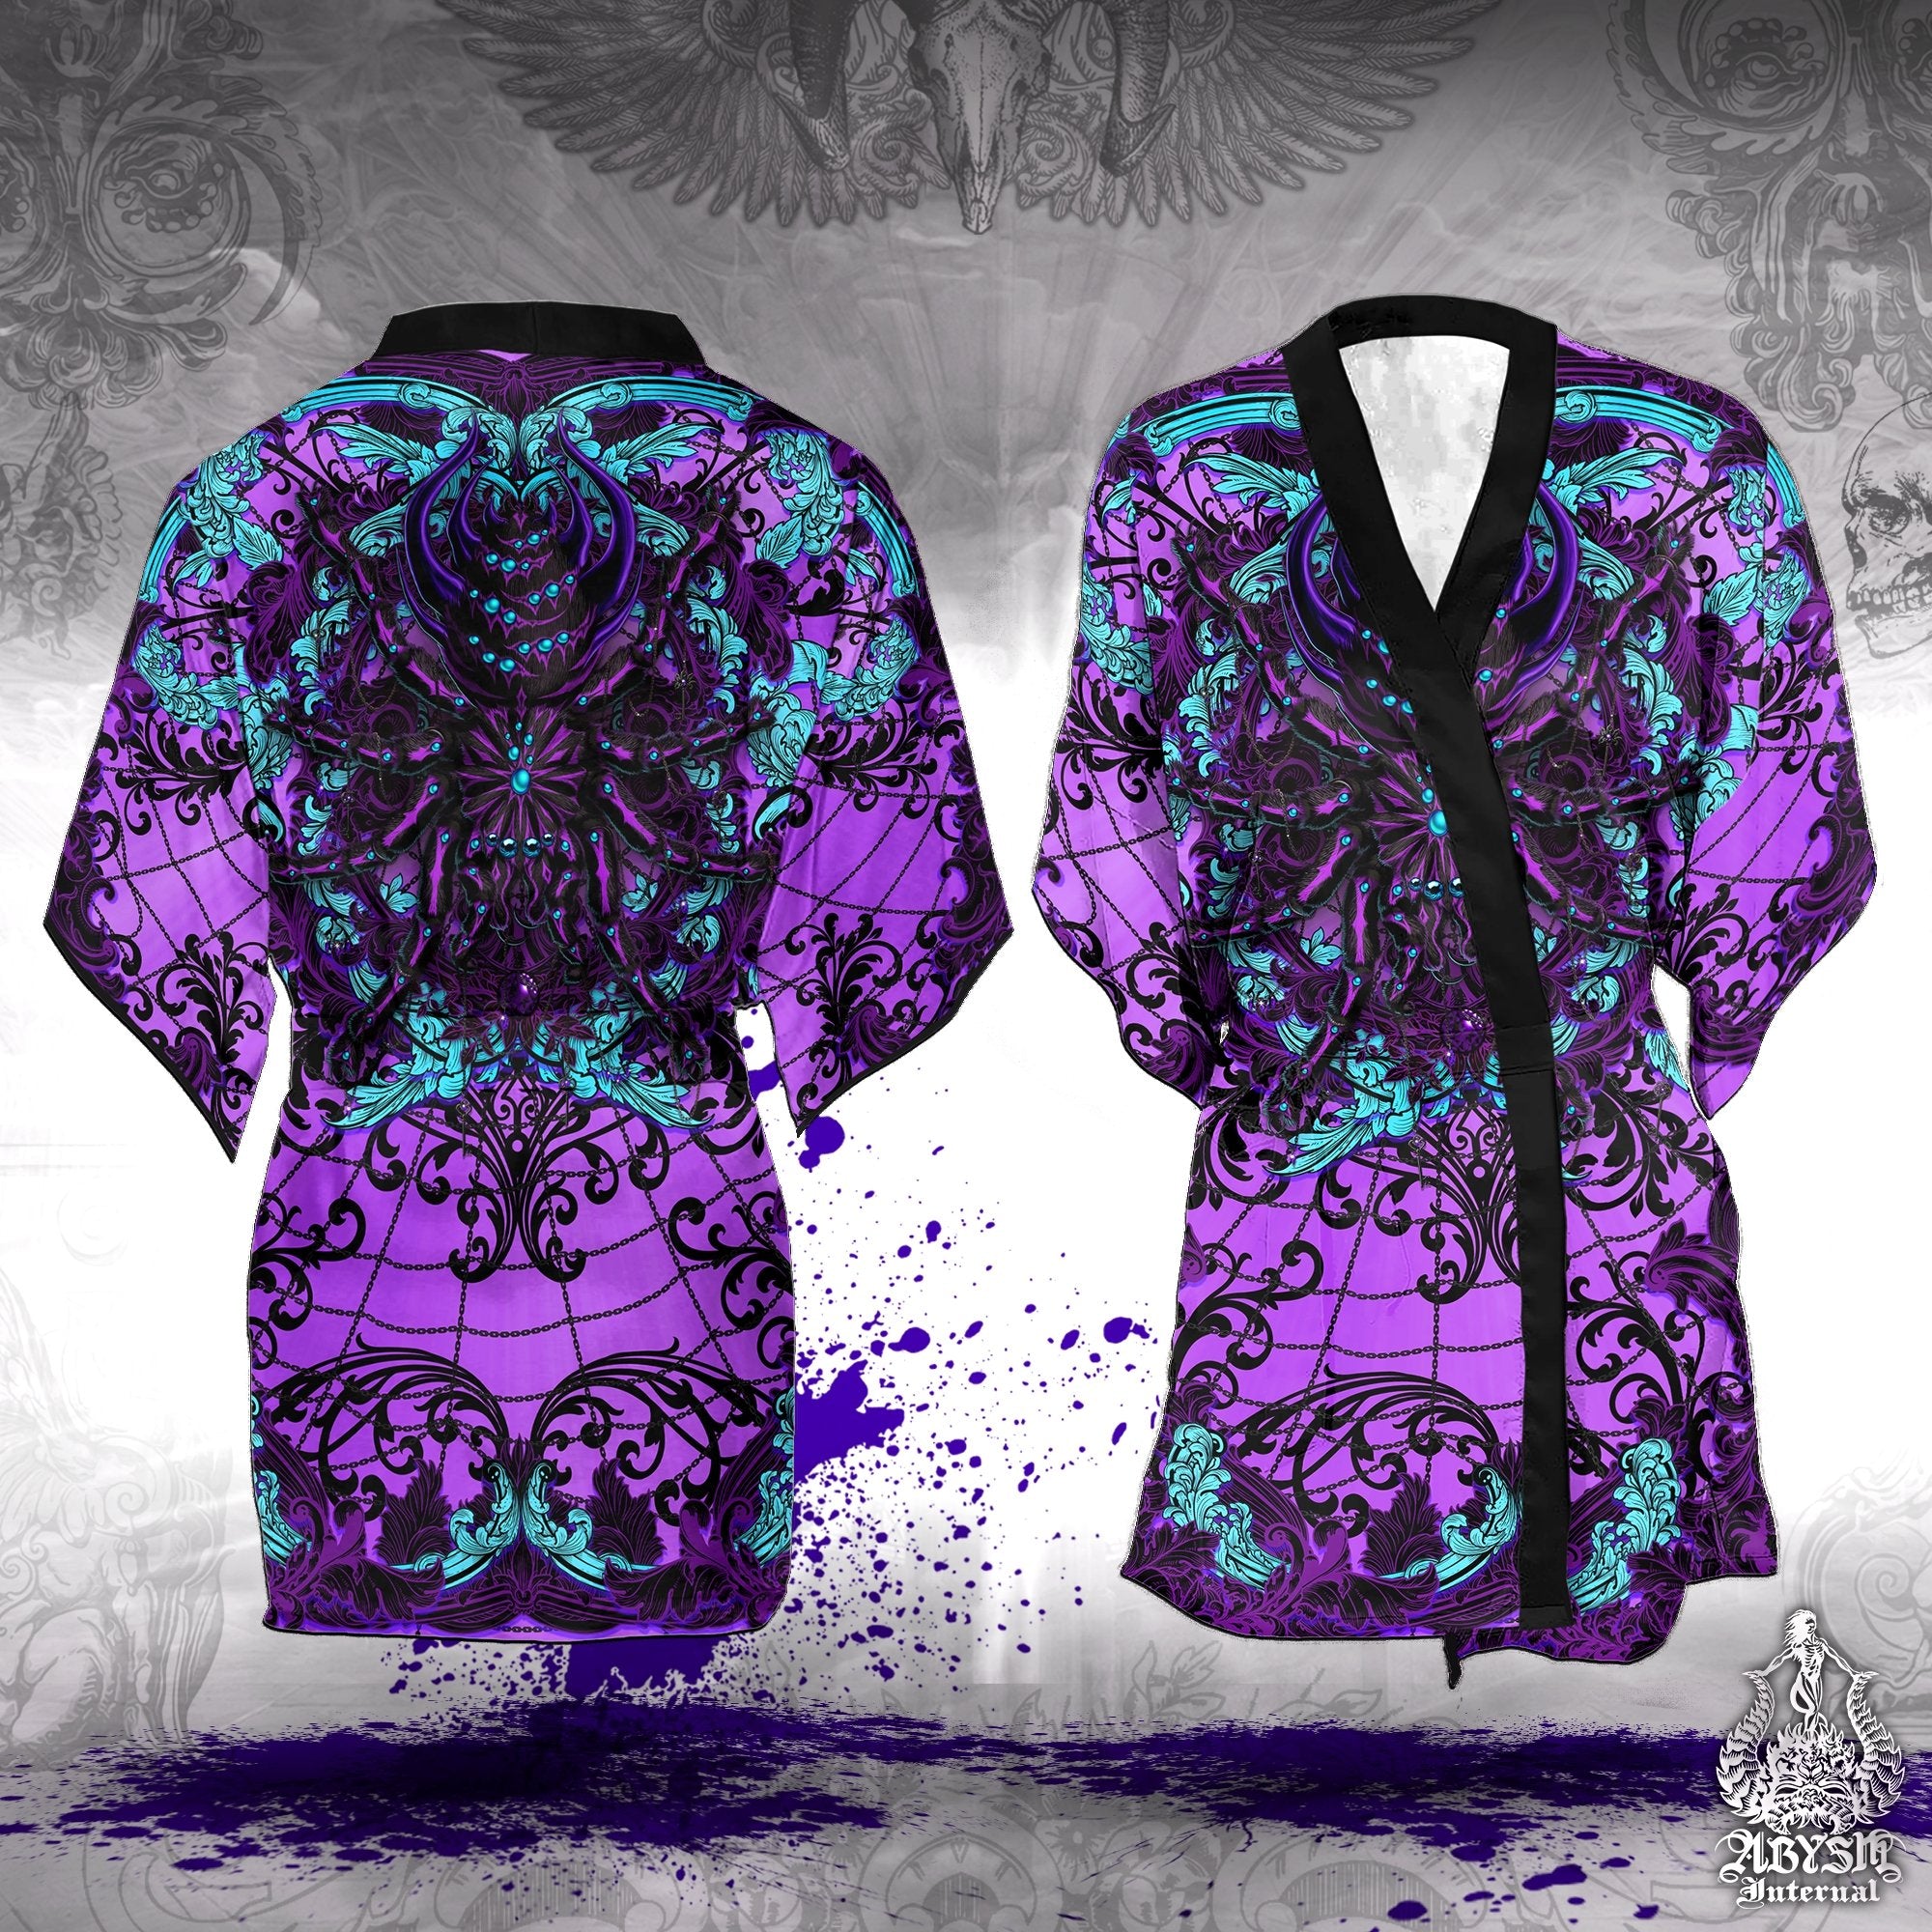 Pastel Goth Cover Up, Beach Outfit, Spider Party Kimono, Summer Festival Robe, Indie and Alternative Clothing, Unisex - Tarantula, Black and Purple - Abysm Internal